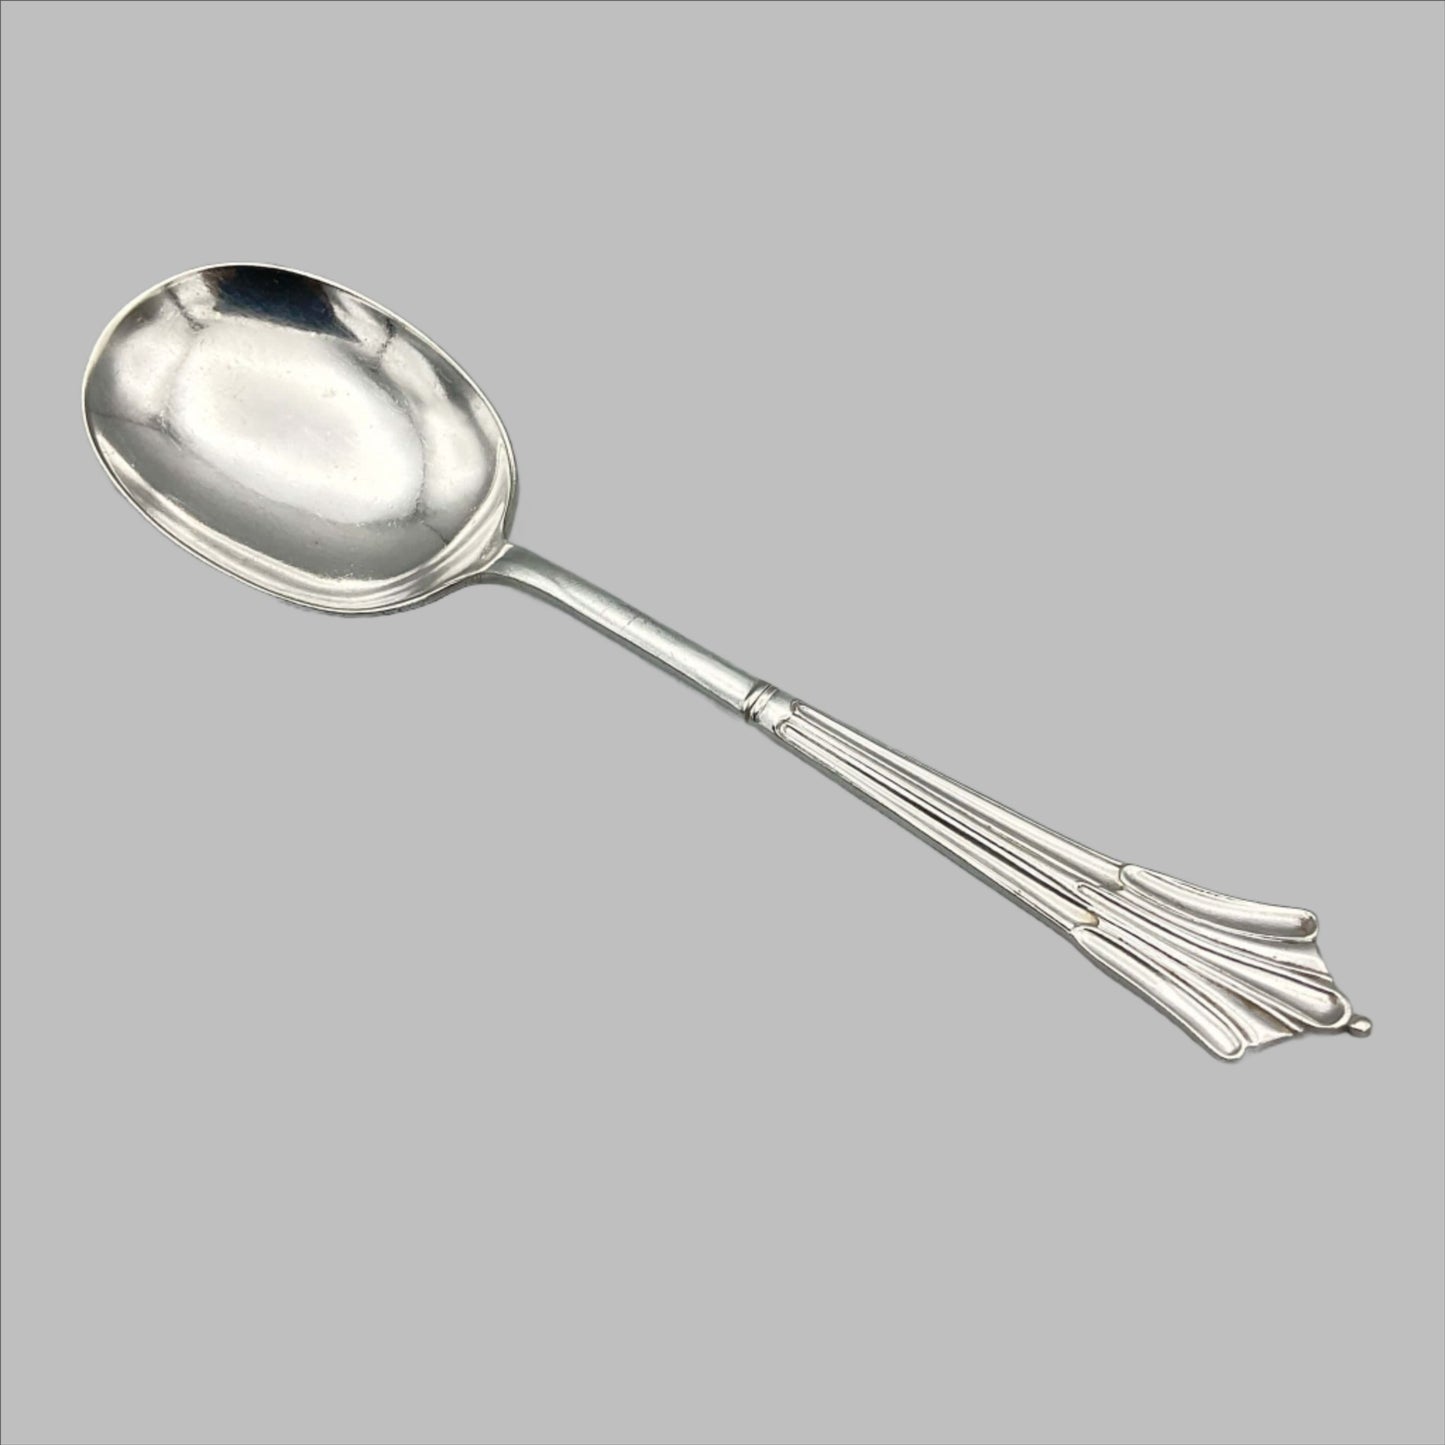 1940s Art Deco Silver Plated Spoon